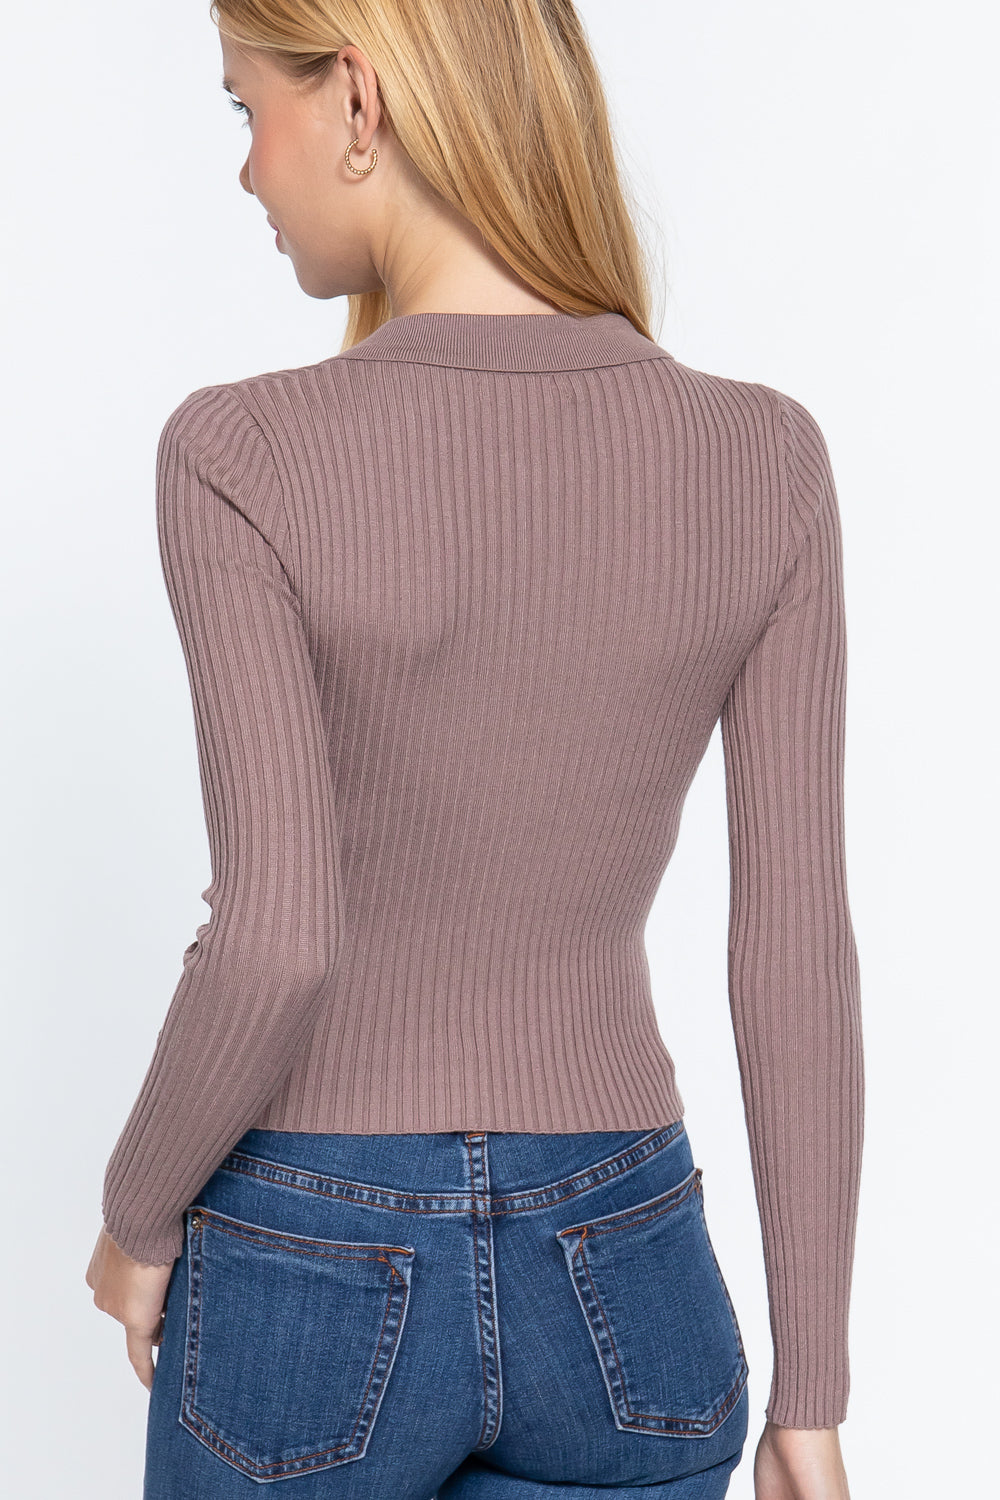 Notched Collar Zippered Sweater - Love It Clothing